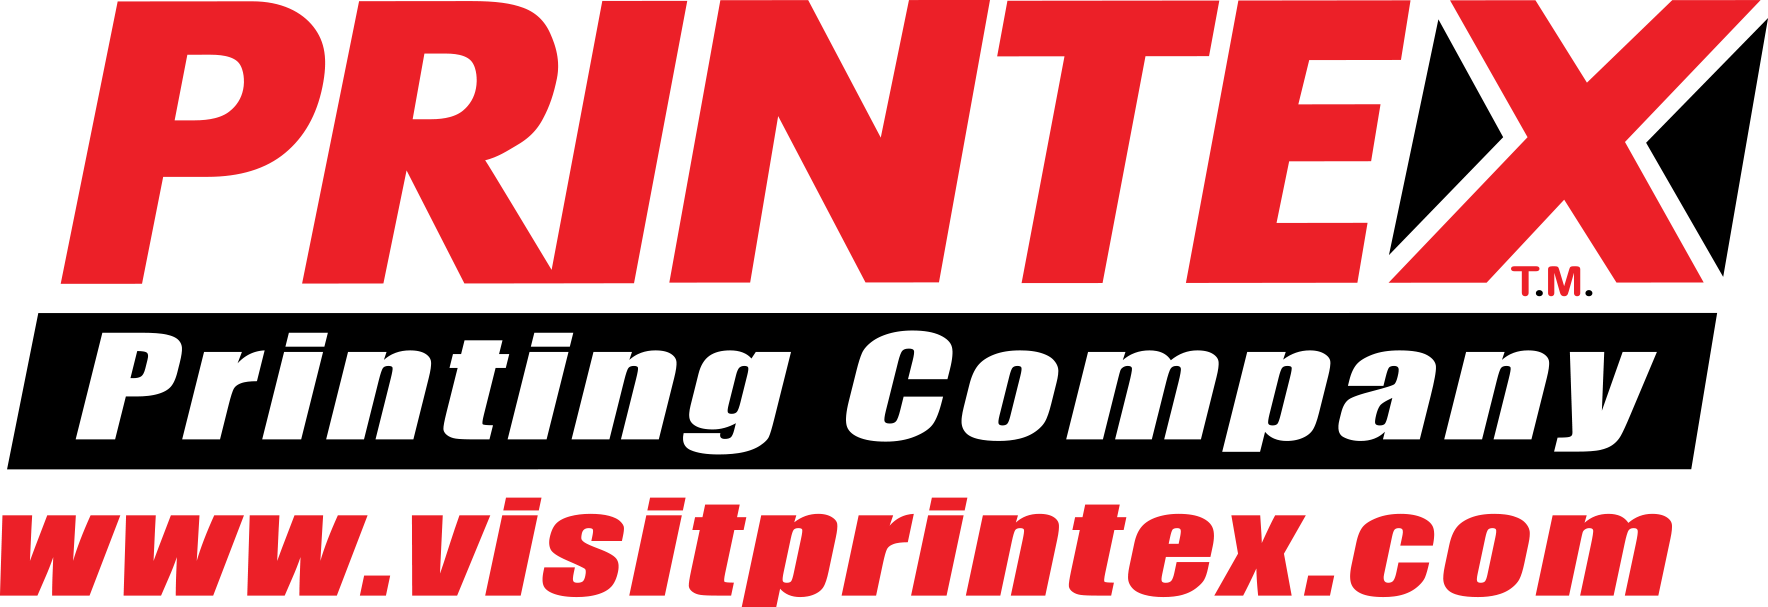 PRINTEX Printing in Chillicothe OH and Waverly, OH | Print me